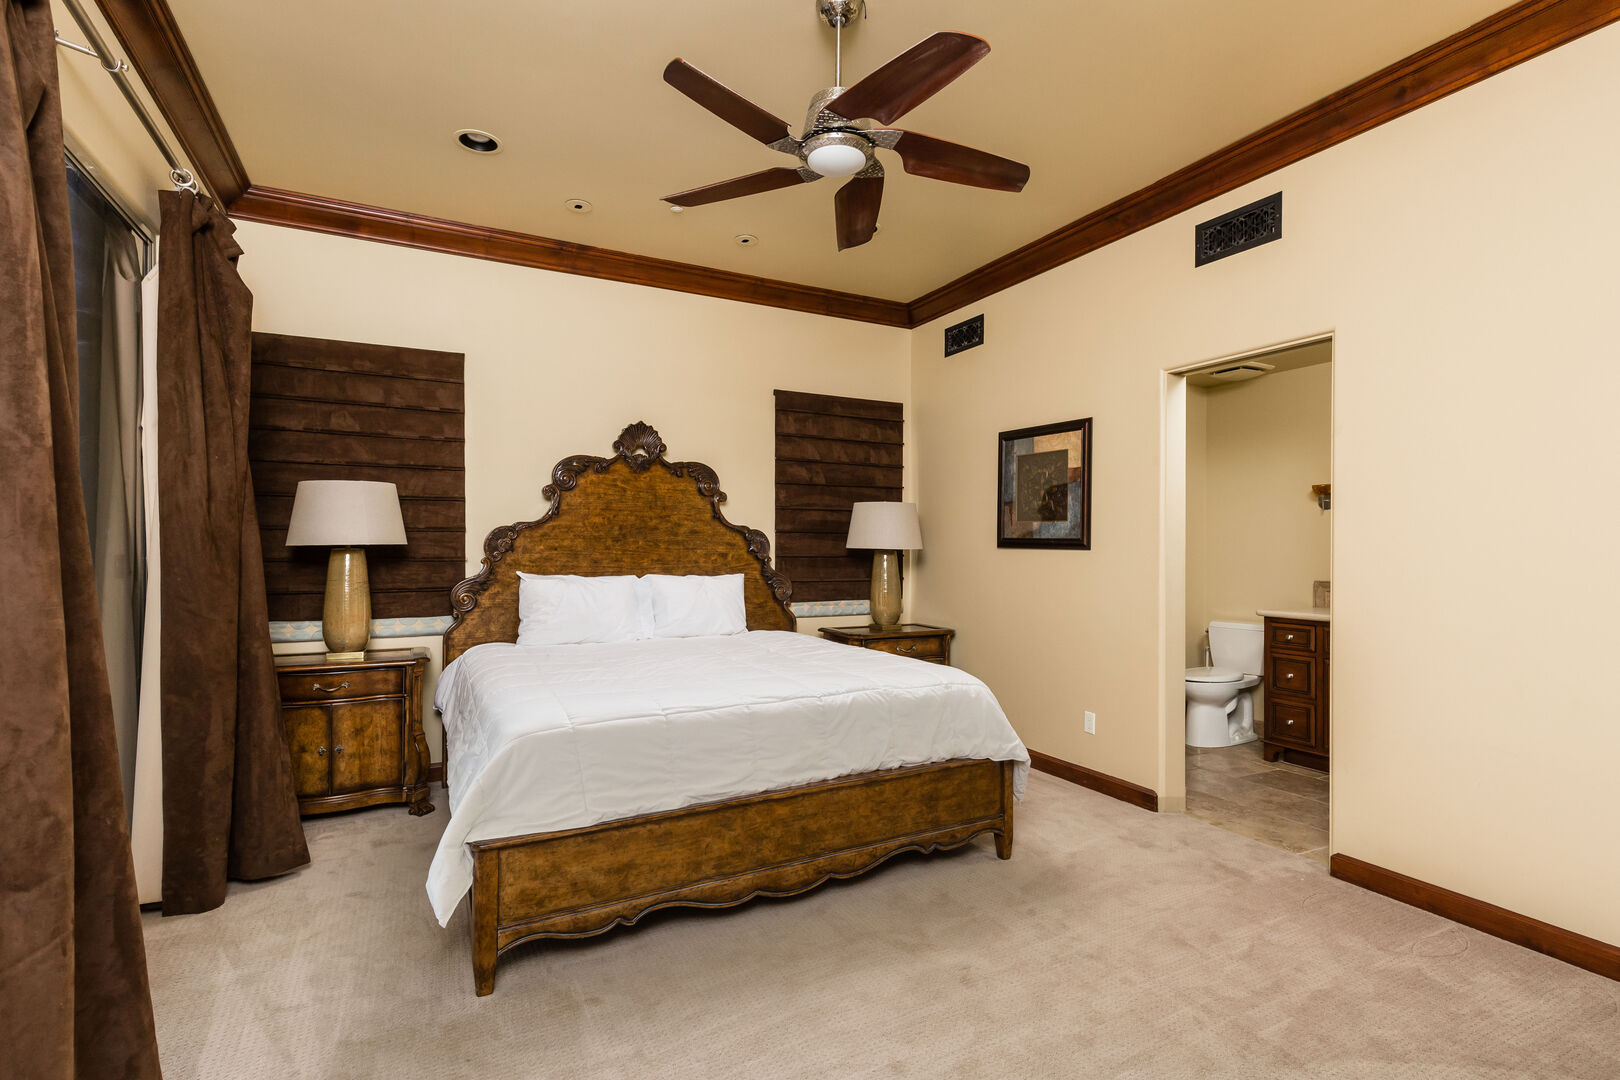 3rd Bedroom featuring a King Bed, bedroom furnishings, and a Smart TV with an ensuite Bathroom.